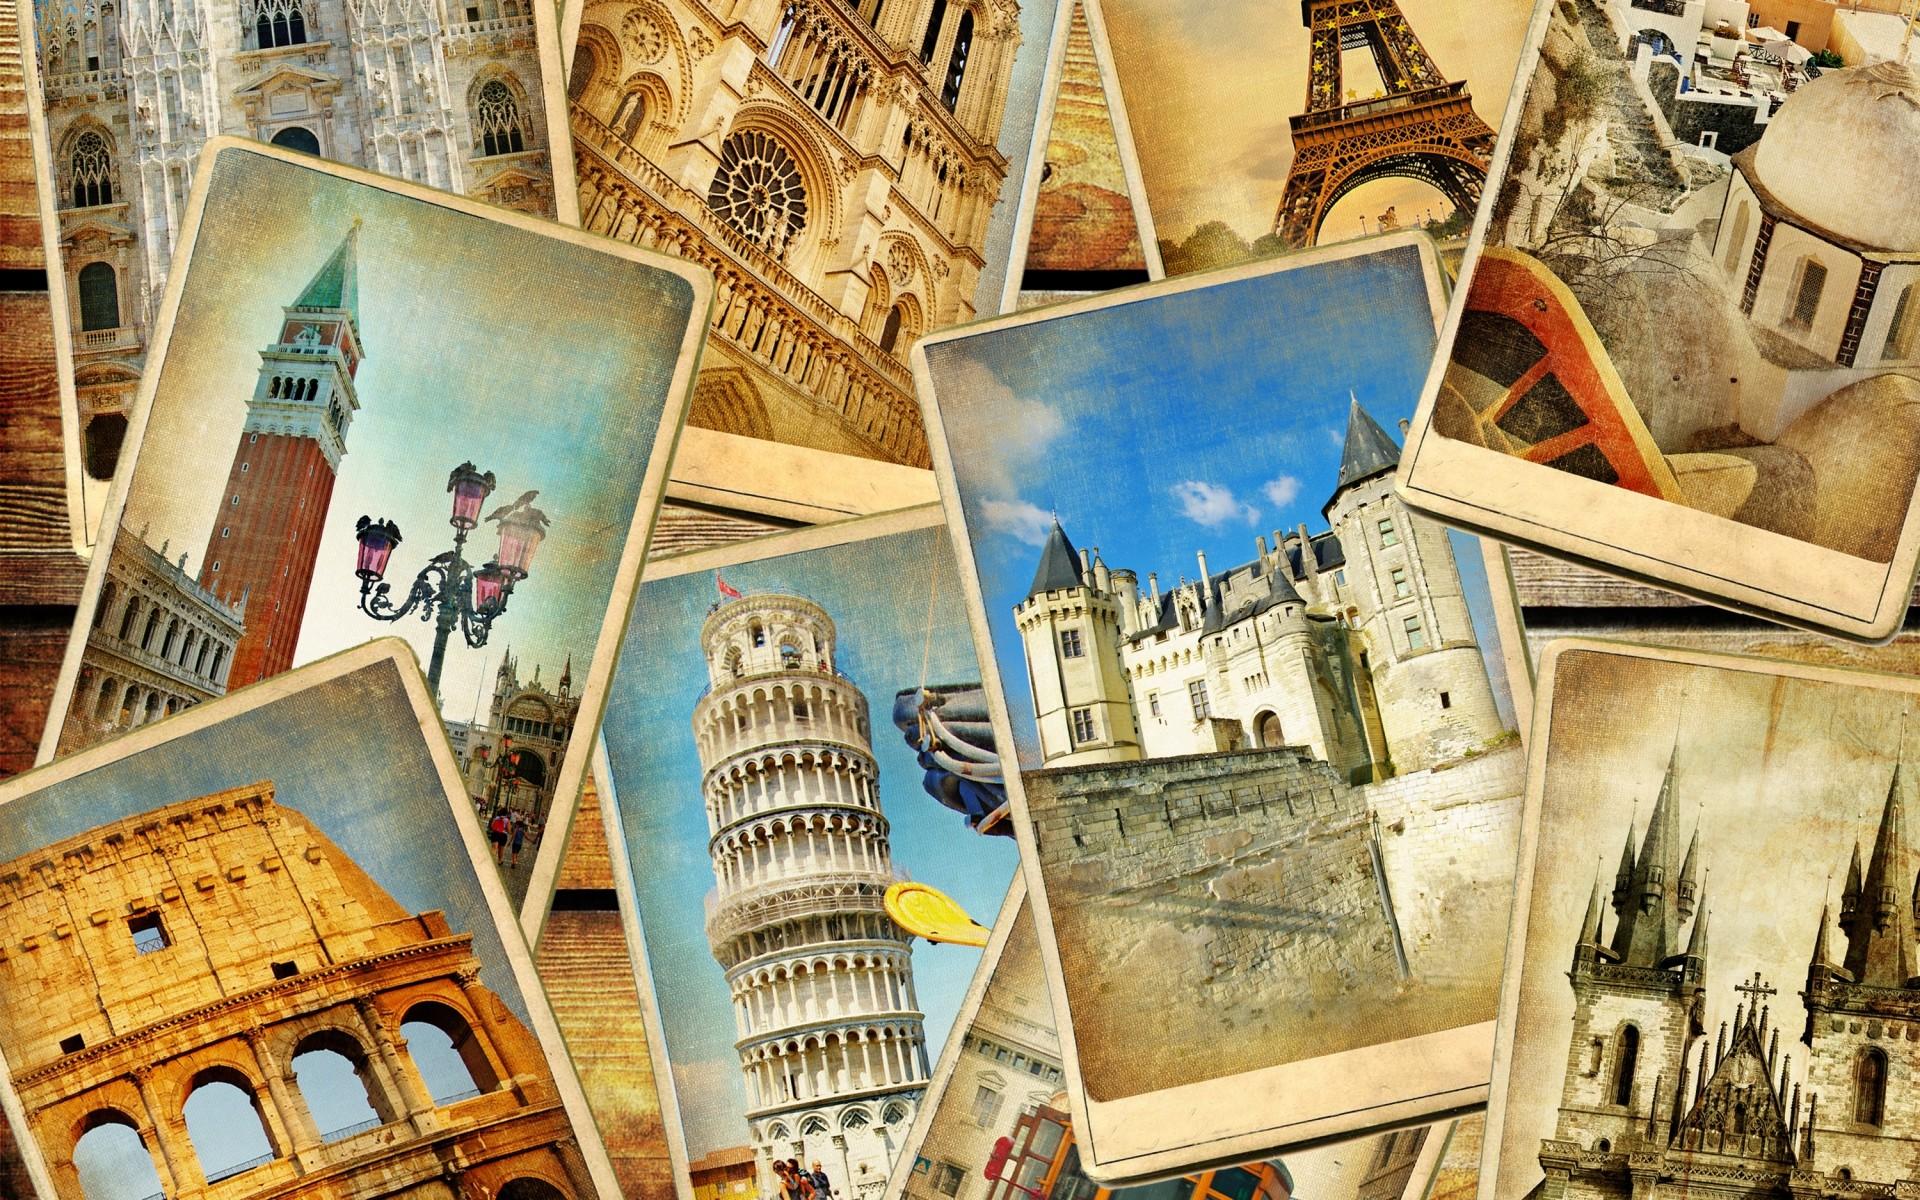 Around The World Travel Tour Poster Background Wallpaper Image For Free  Download - Pngtree